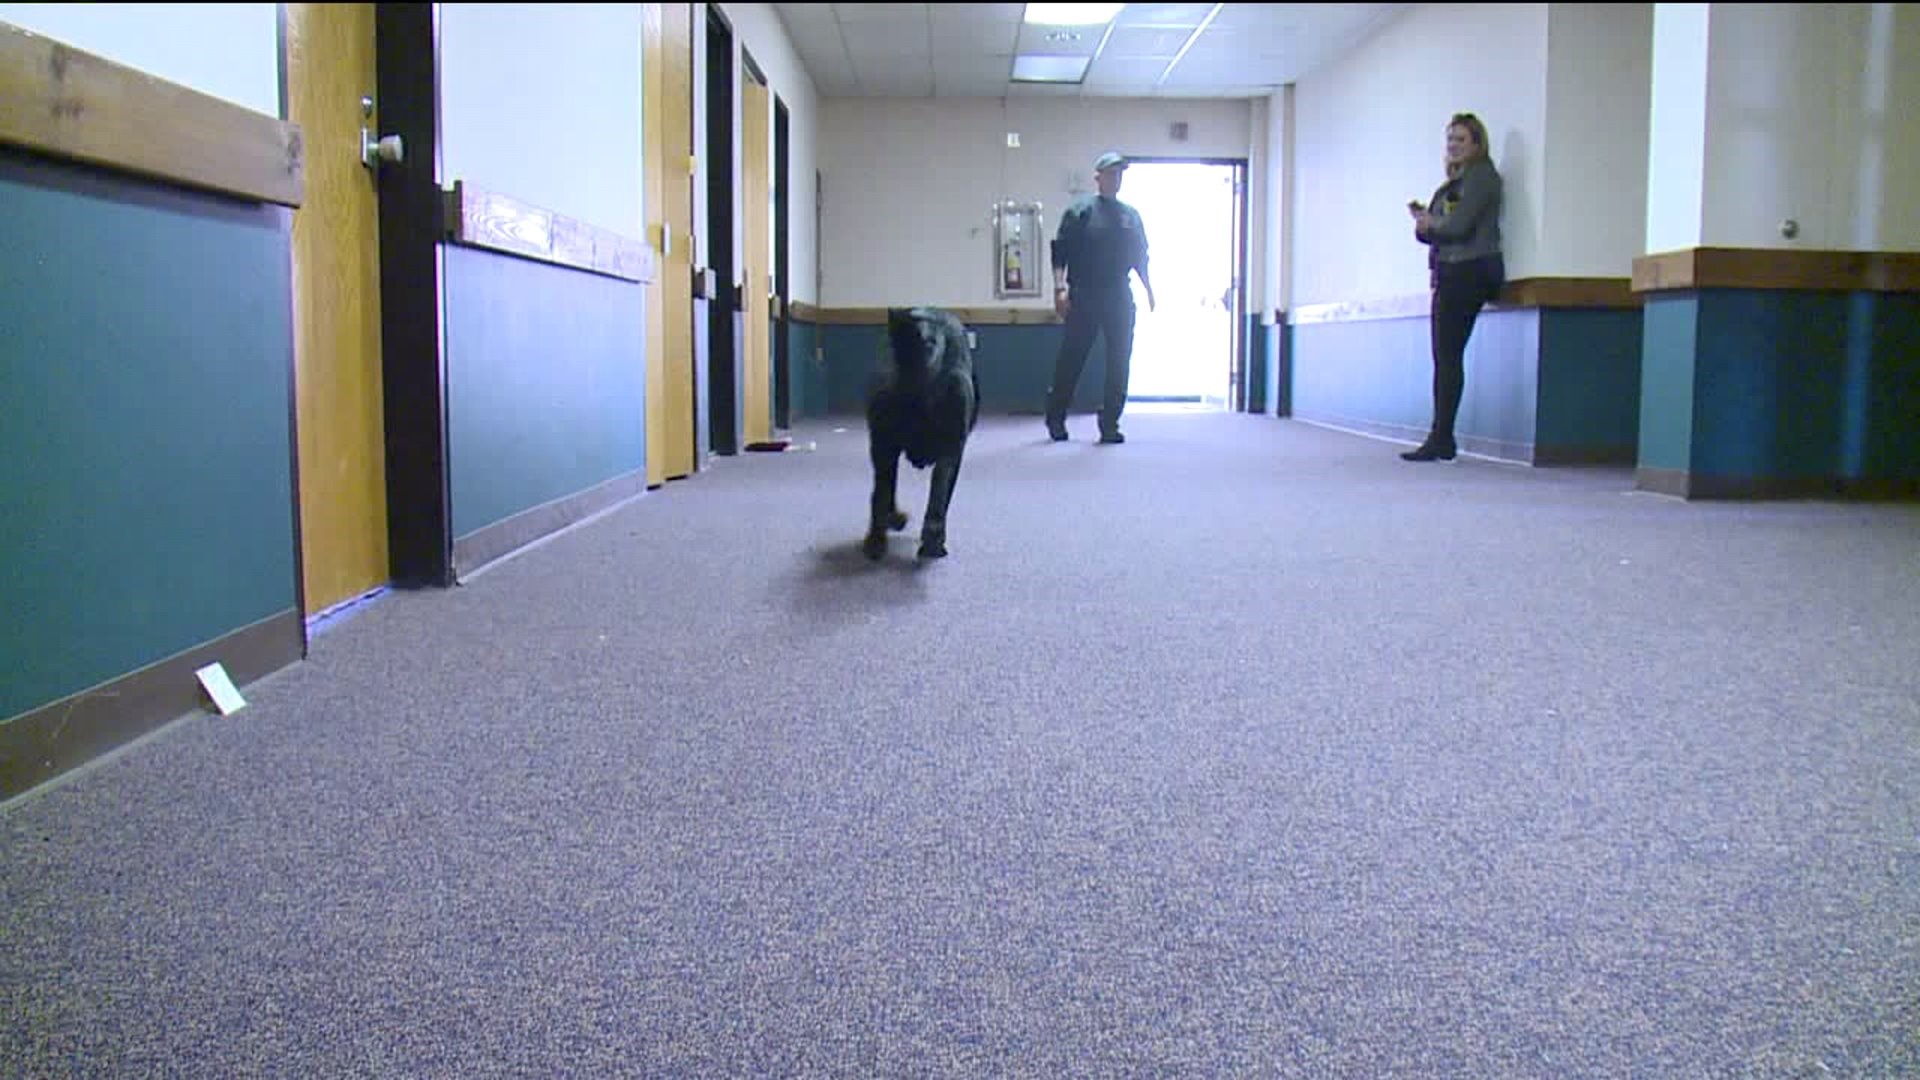 K-9 Officers in National Contest